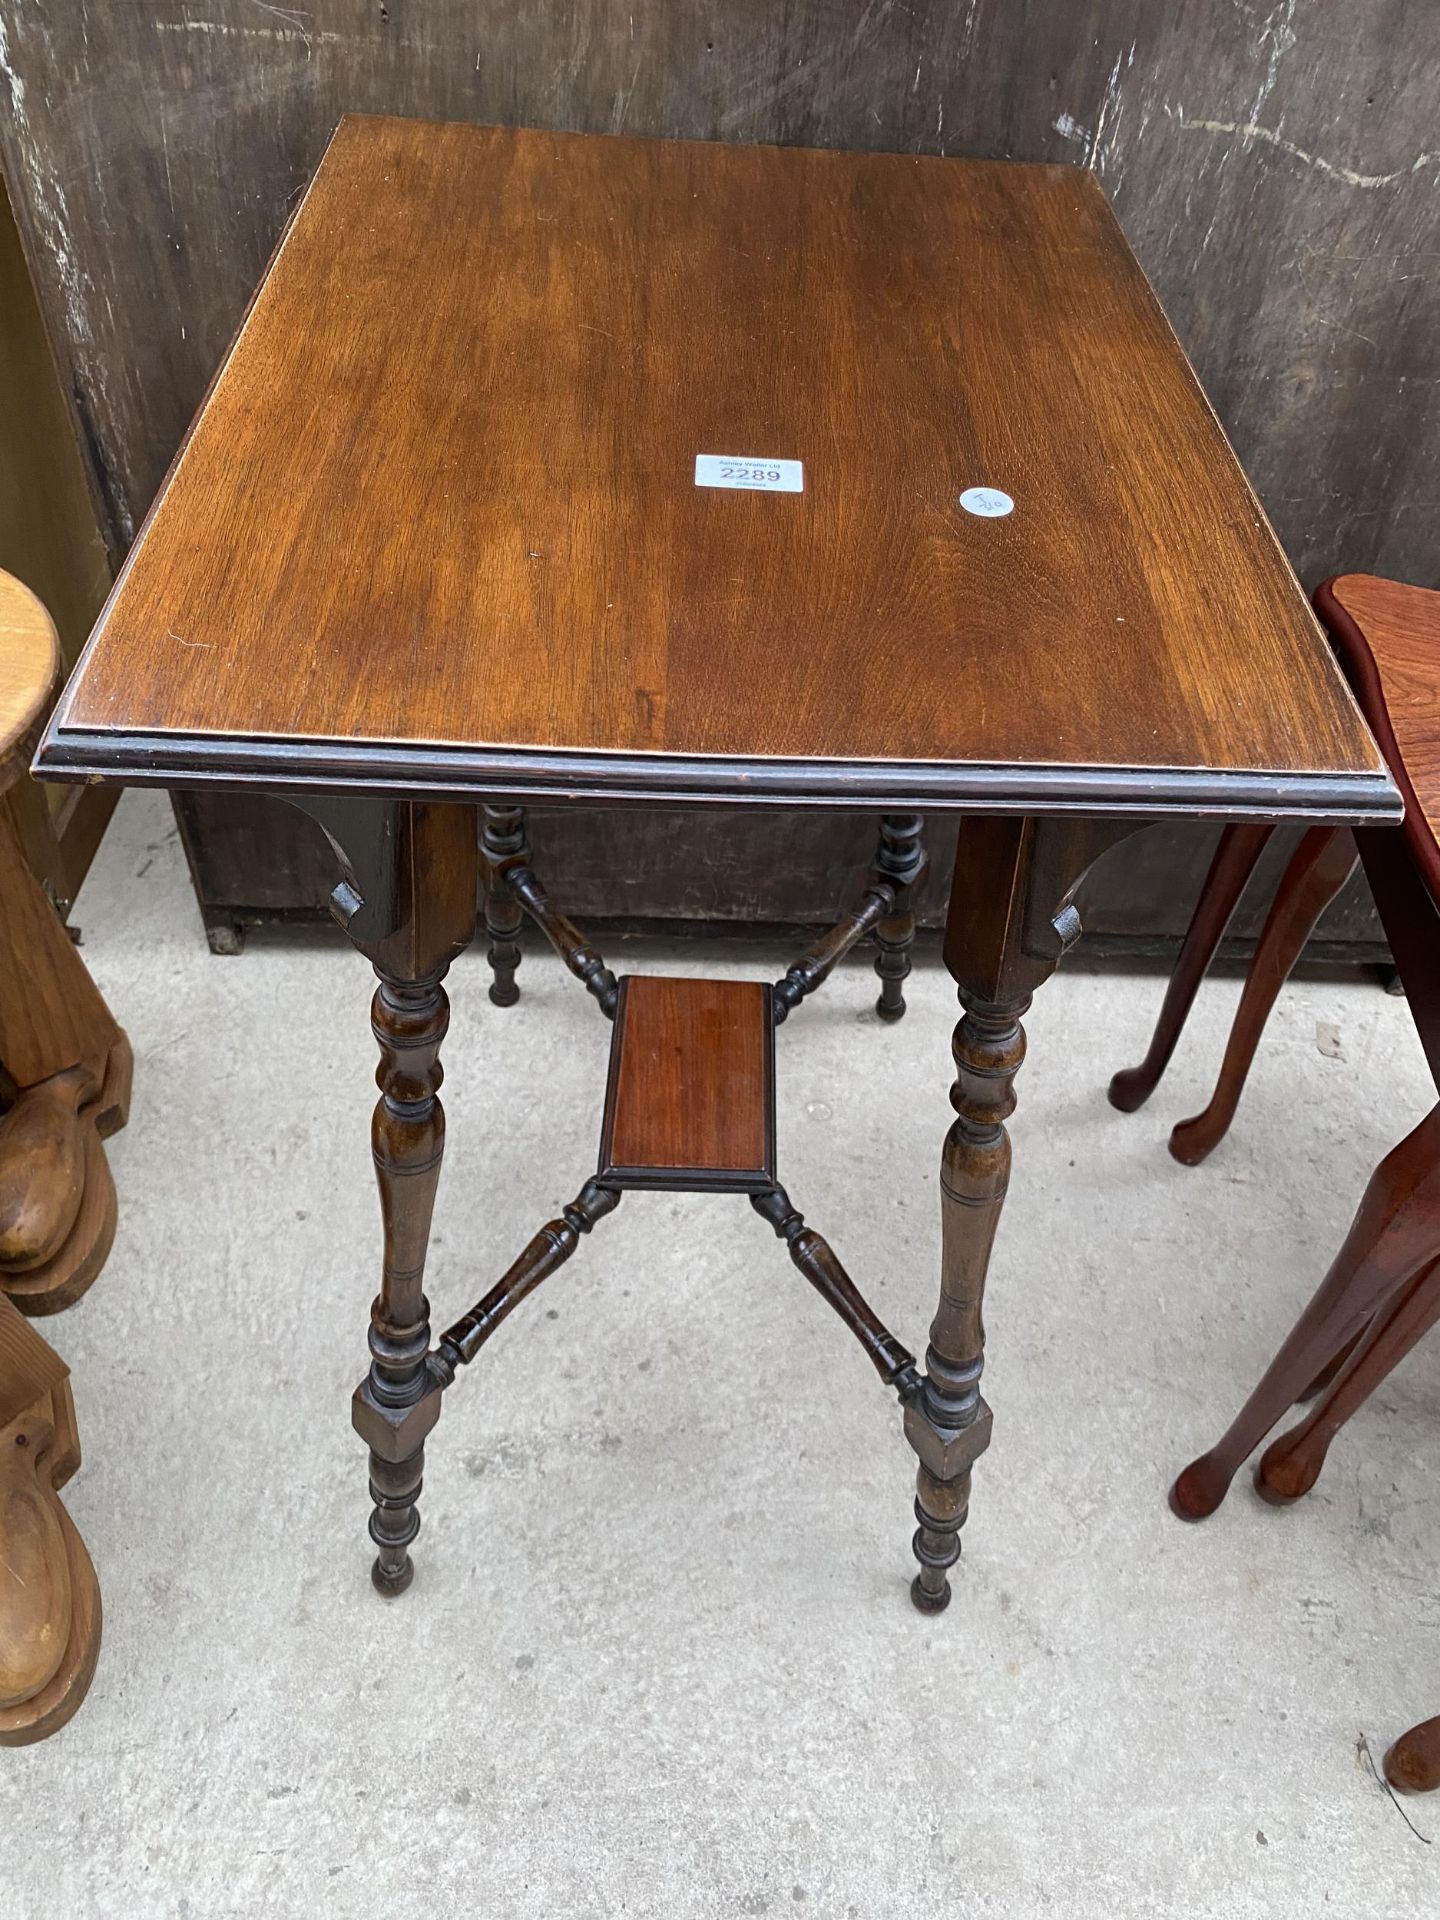 A LATE VICTORIAN MAHOGANY TWO TIER OCCASIONAL TABLE WITH TURNED LEGS AND STRETCHERS, 20X16"